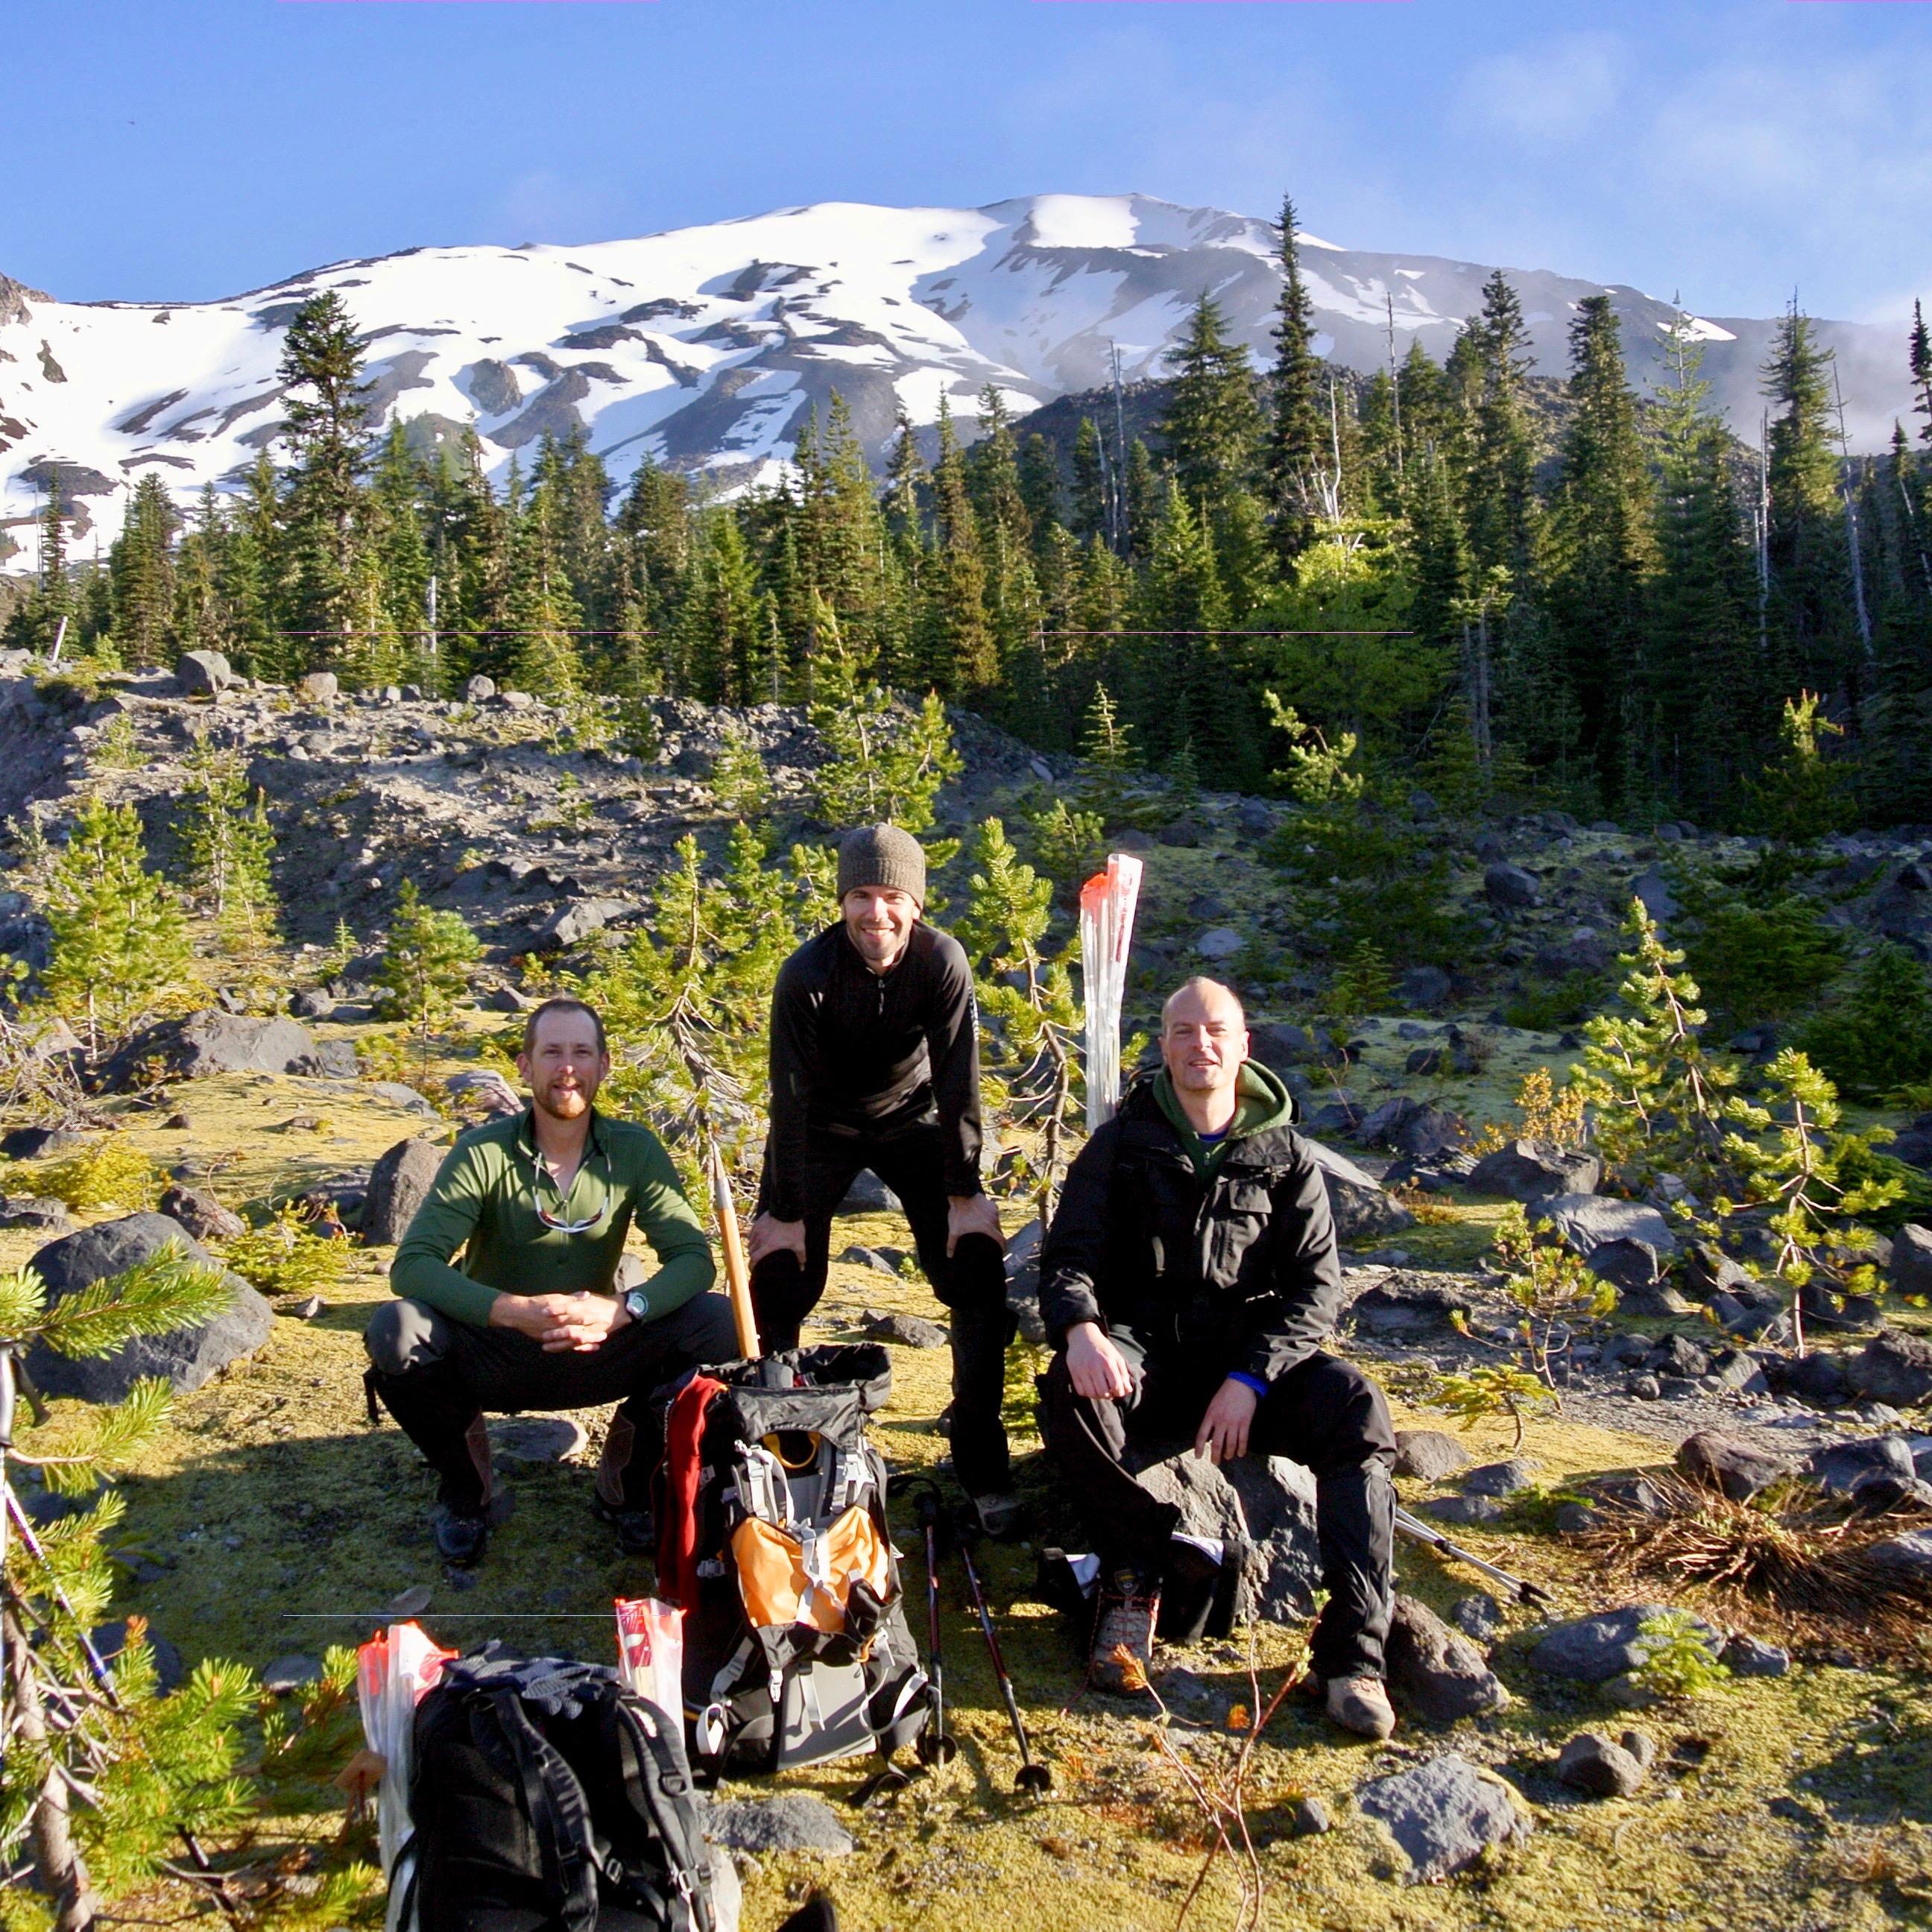 Matthew Kessi (right) and two friends prepare to climb to the summit of Mt. St. Helens in Washington State.  Two of them are seated while the third hiker is standing between them.  They are all smiling with the beam of morning sun on their faces, wearing hiking gear.  The trees around them are small seedlings scatted amongst the rocks and low grass while a larger forest and the snow covered mountain peak is in the background under a blue sky. 